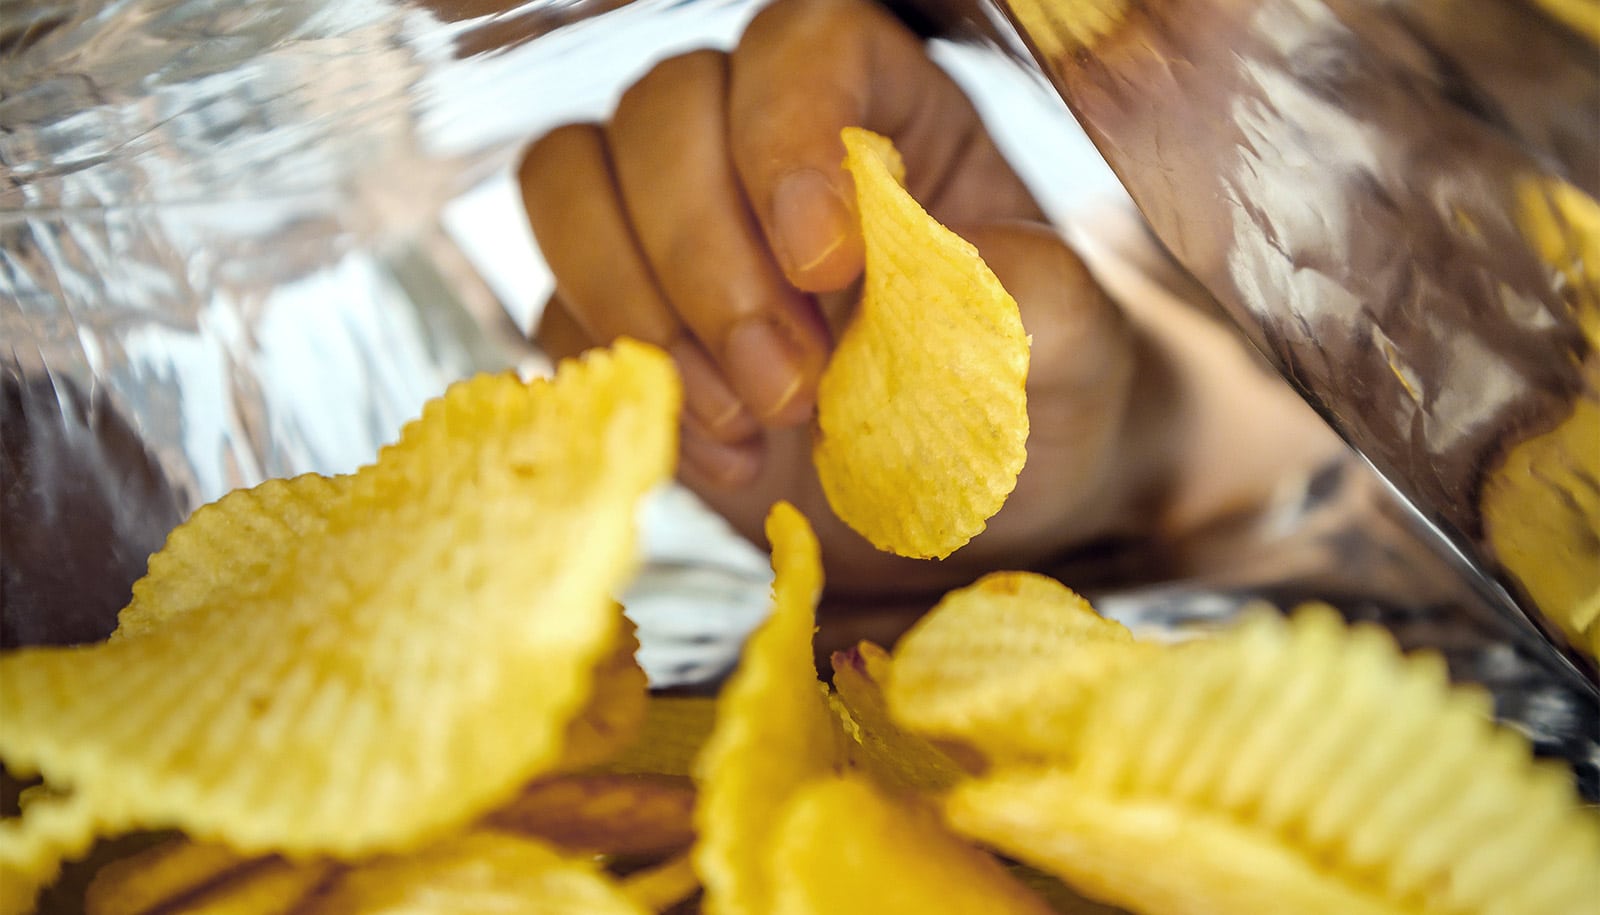 A person reaching into a bag and pulling out a potato chip.